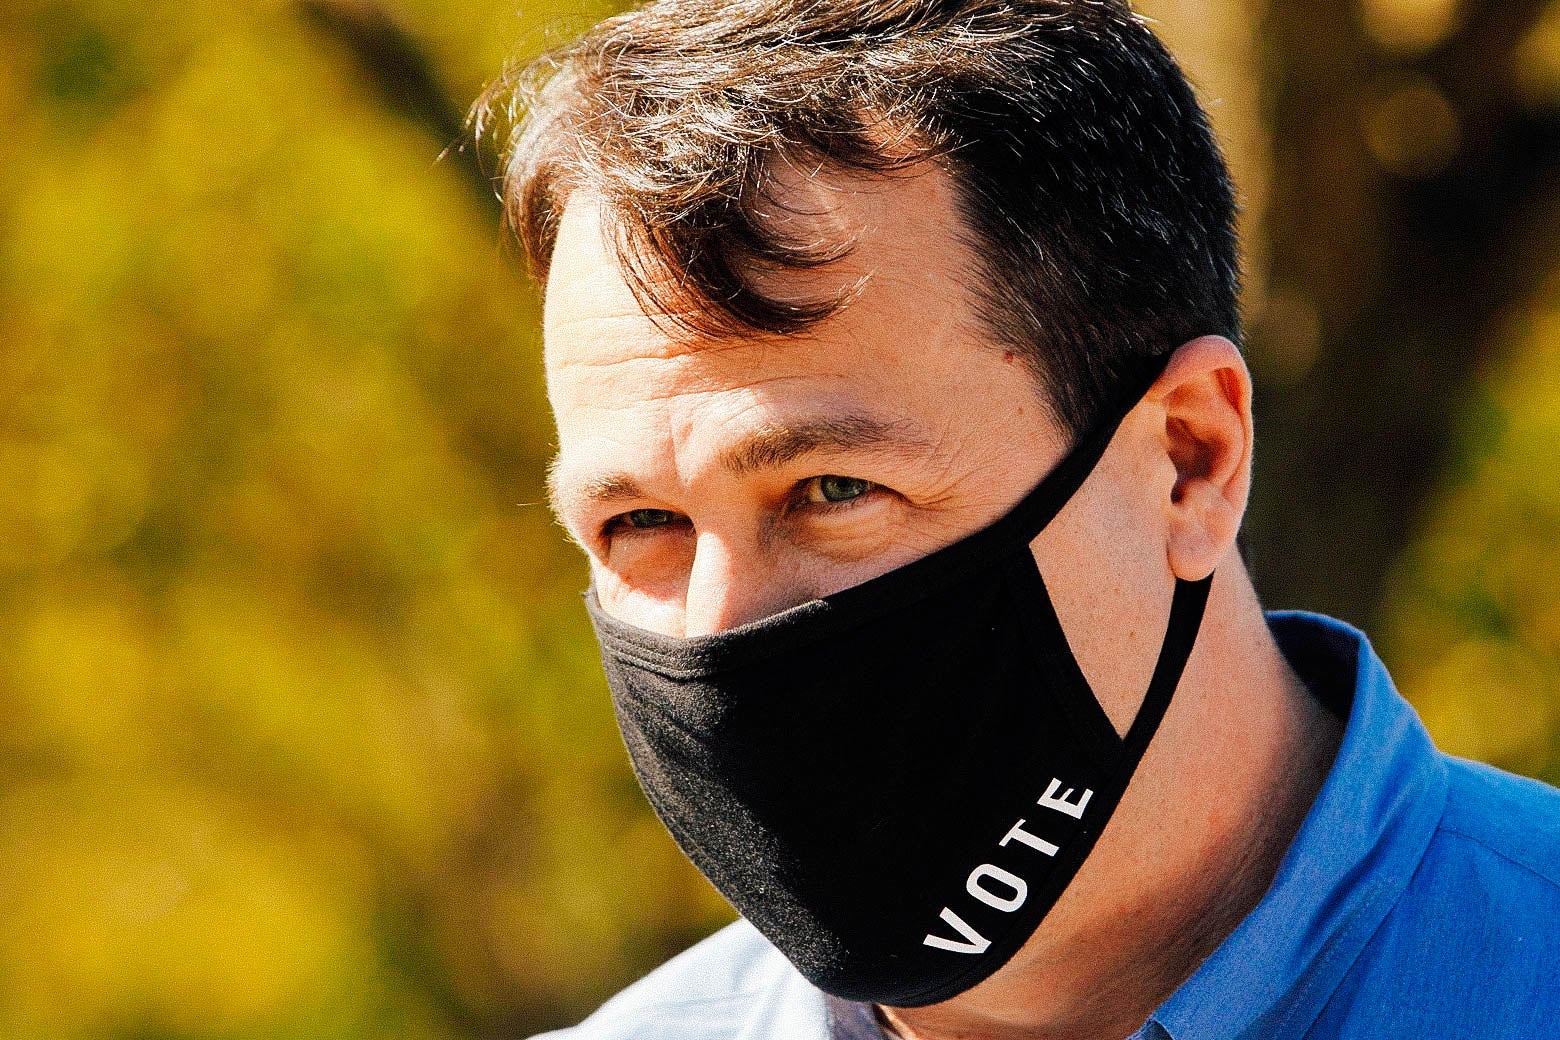 Cal Cunningham wears a blue collared shirt and a black face mask that says "vote" on it.